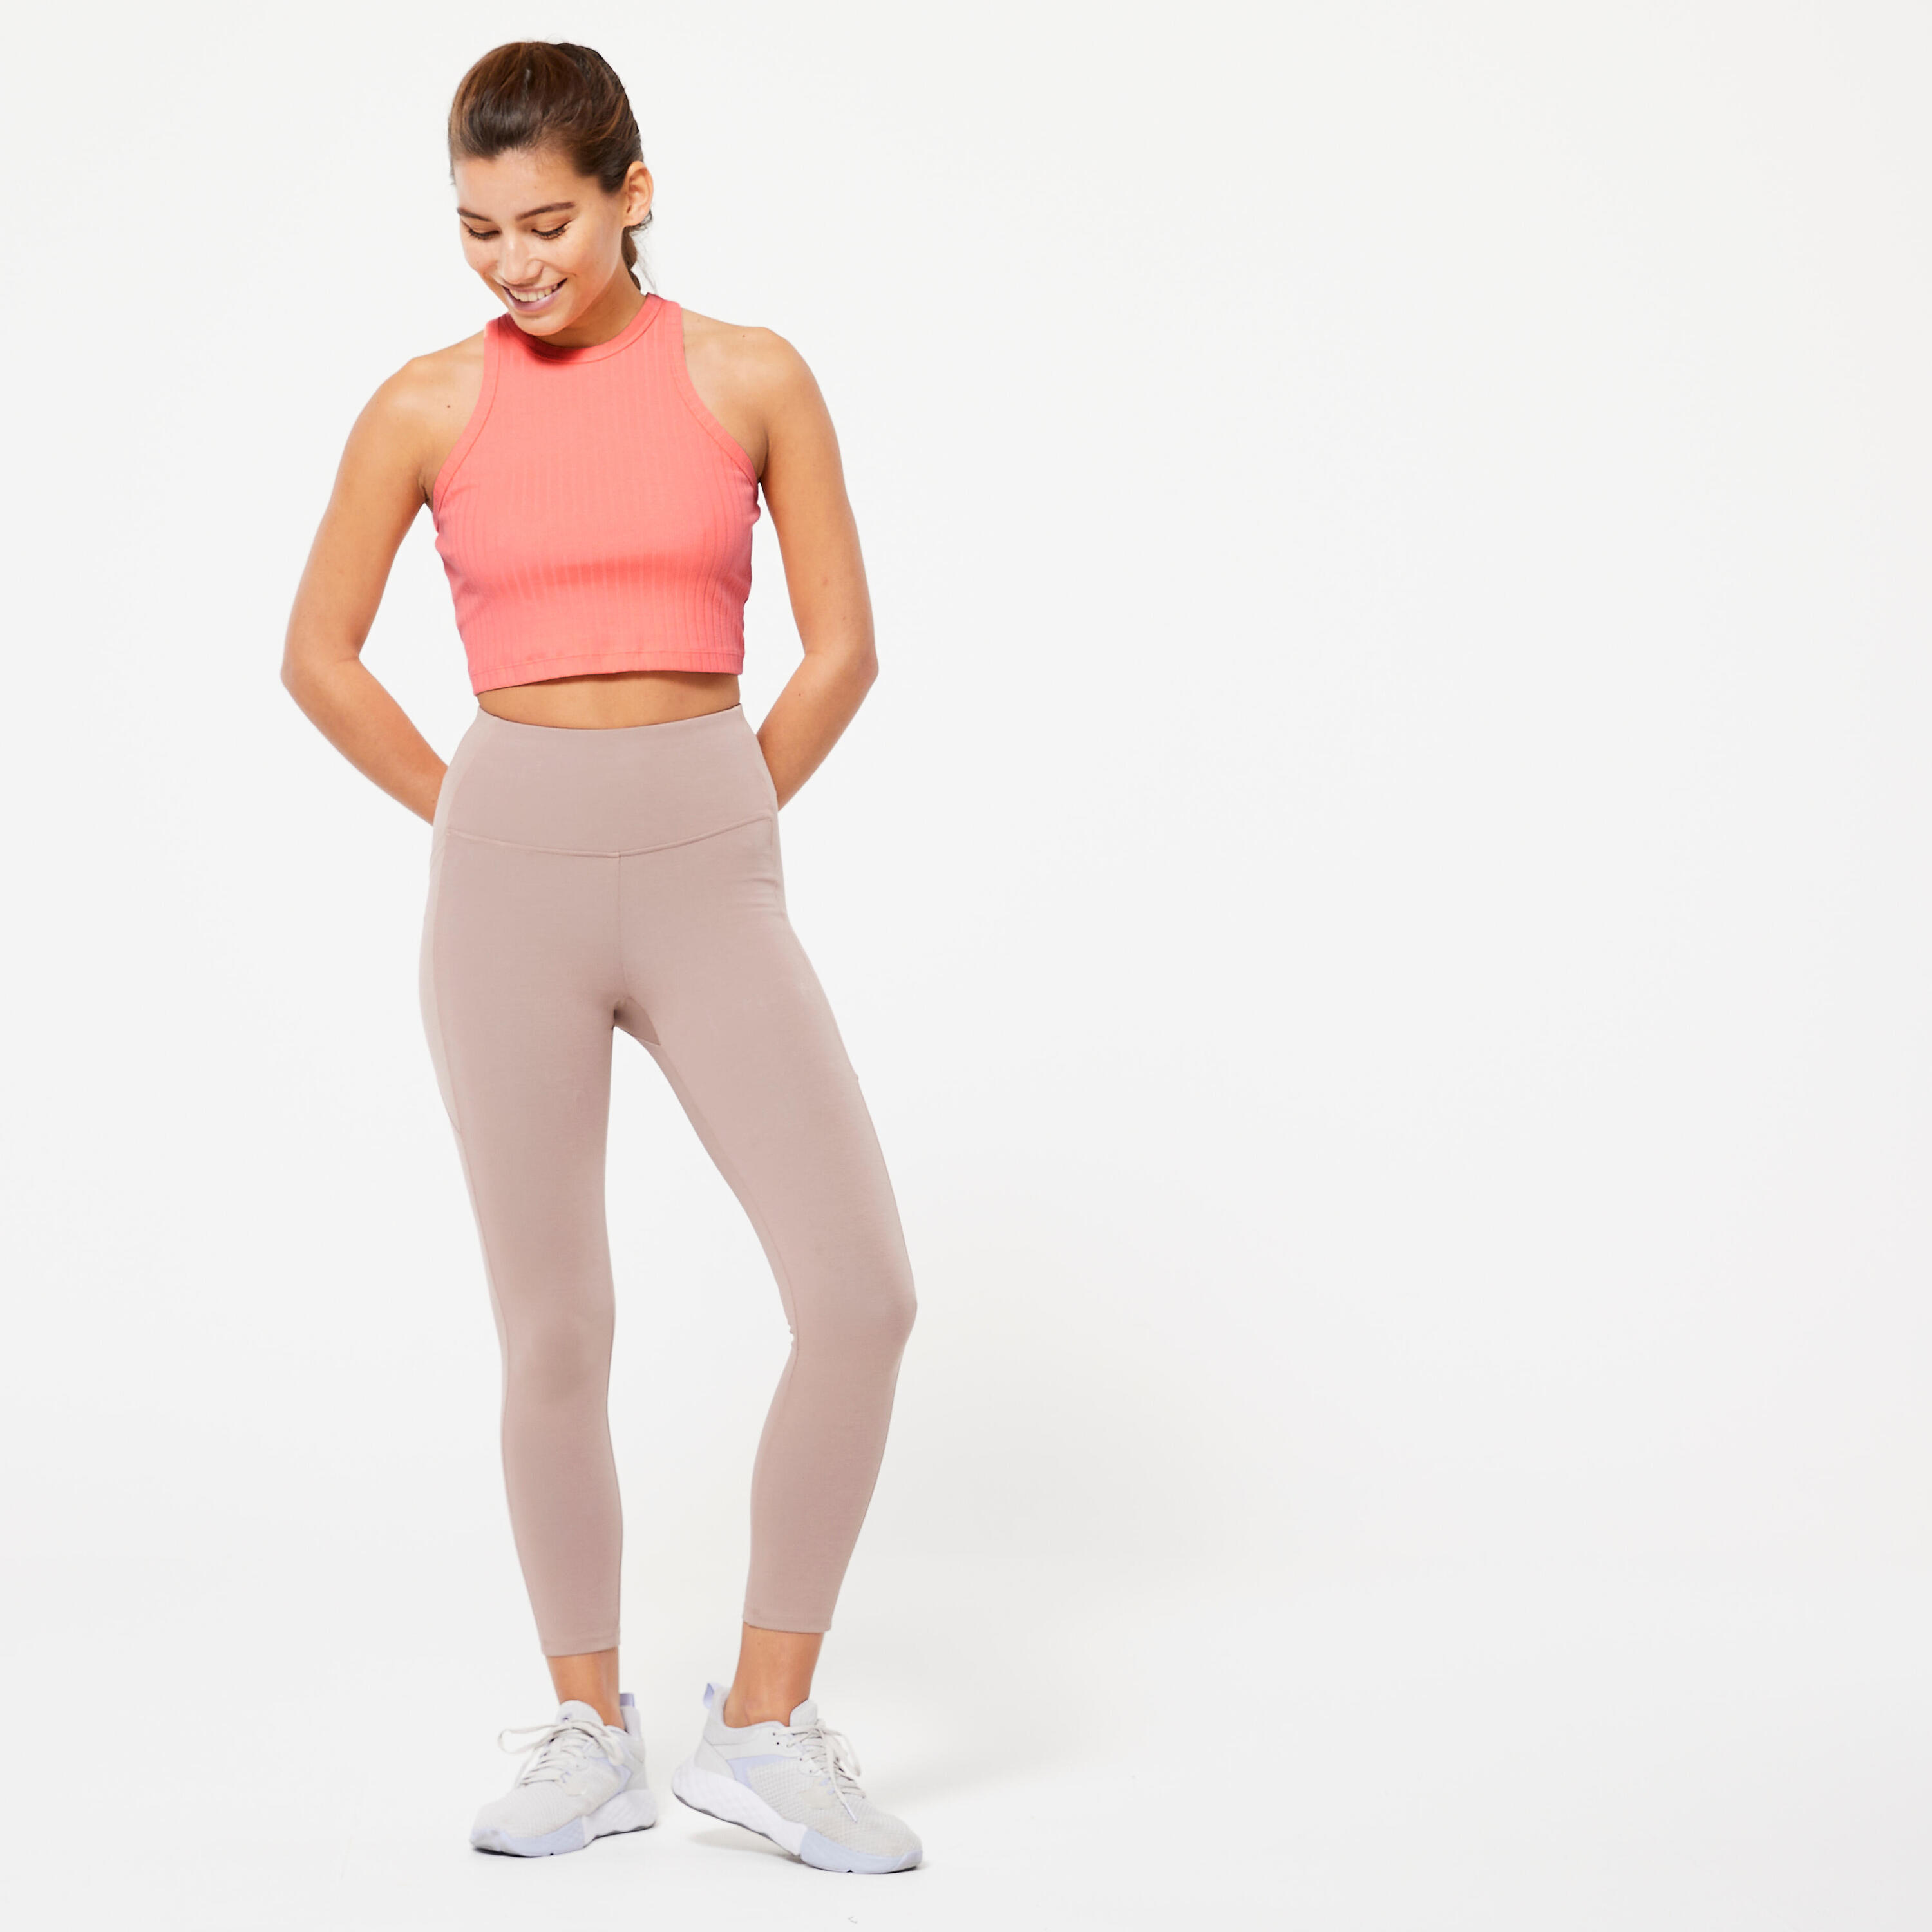 Women's Fitness Ribbed Crop Top 520 - Pastel Coral 2/6